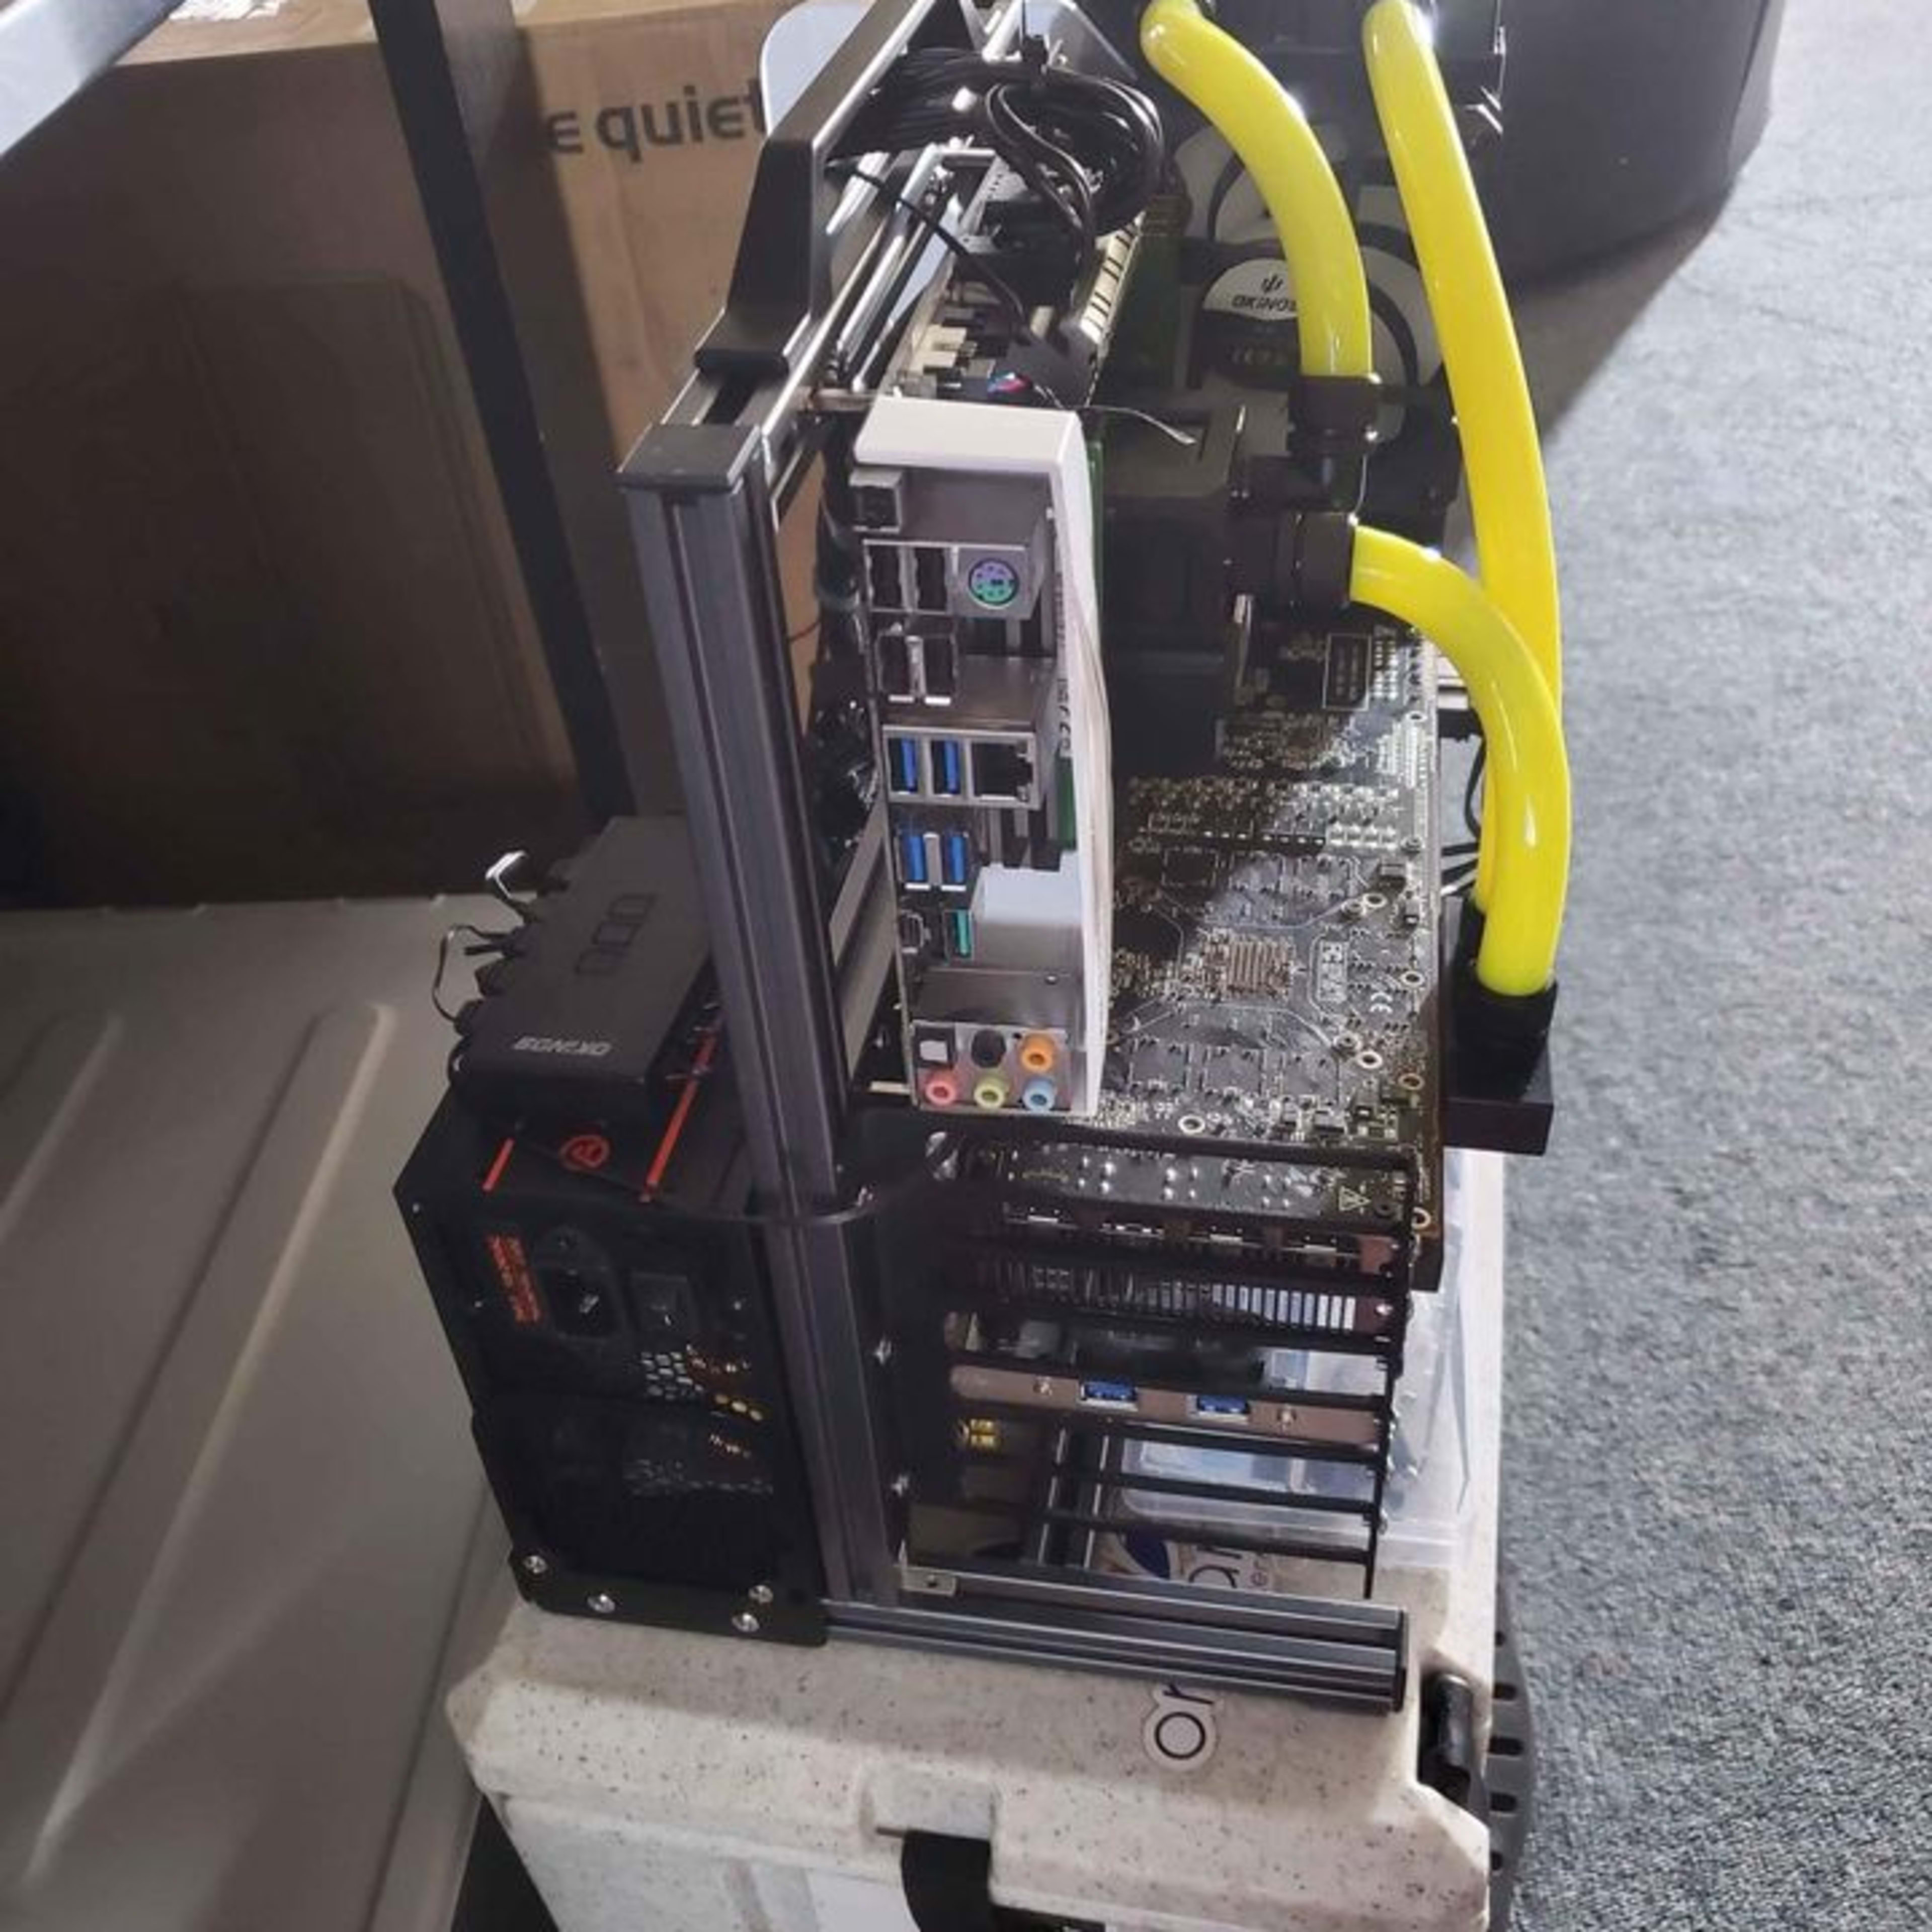 Watercooled Gaming pc i7- 8core 32gb 1tb 5700xt send me an offer